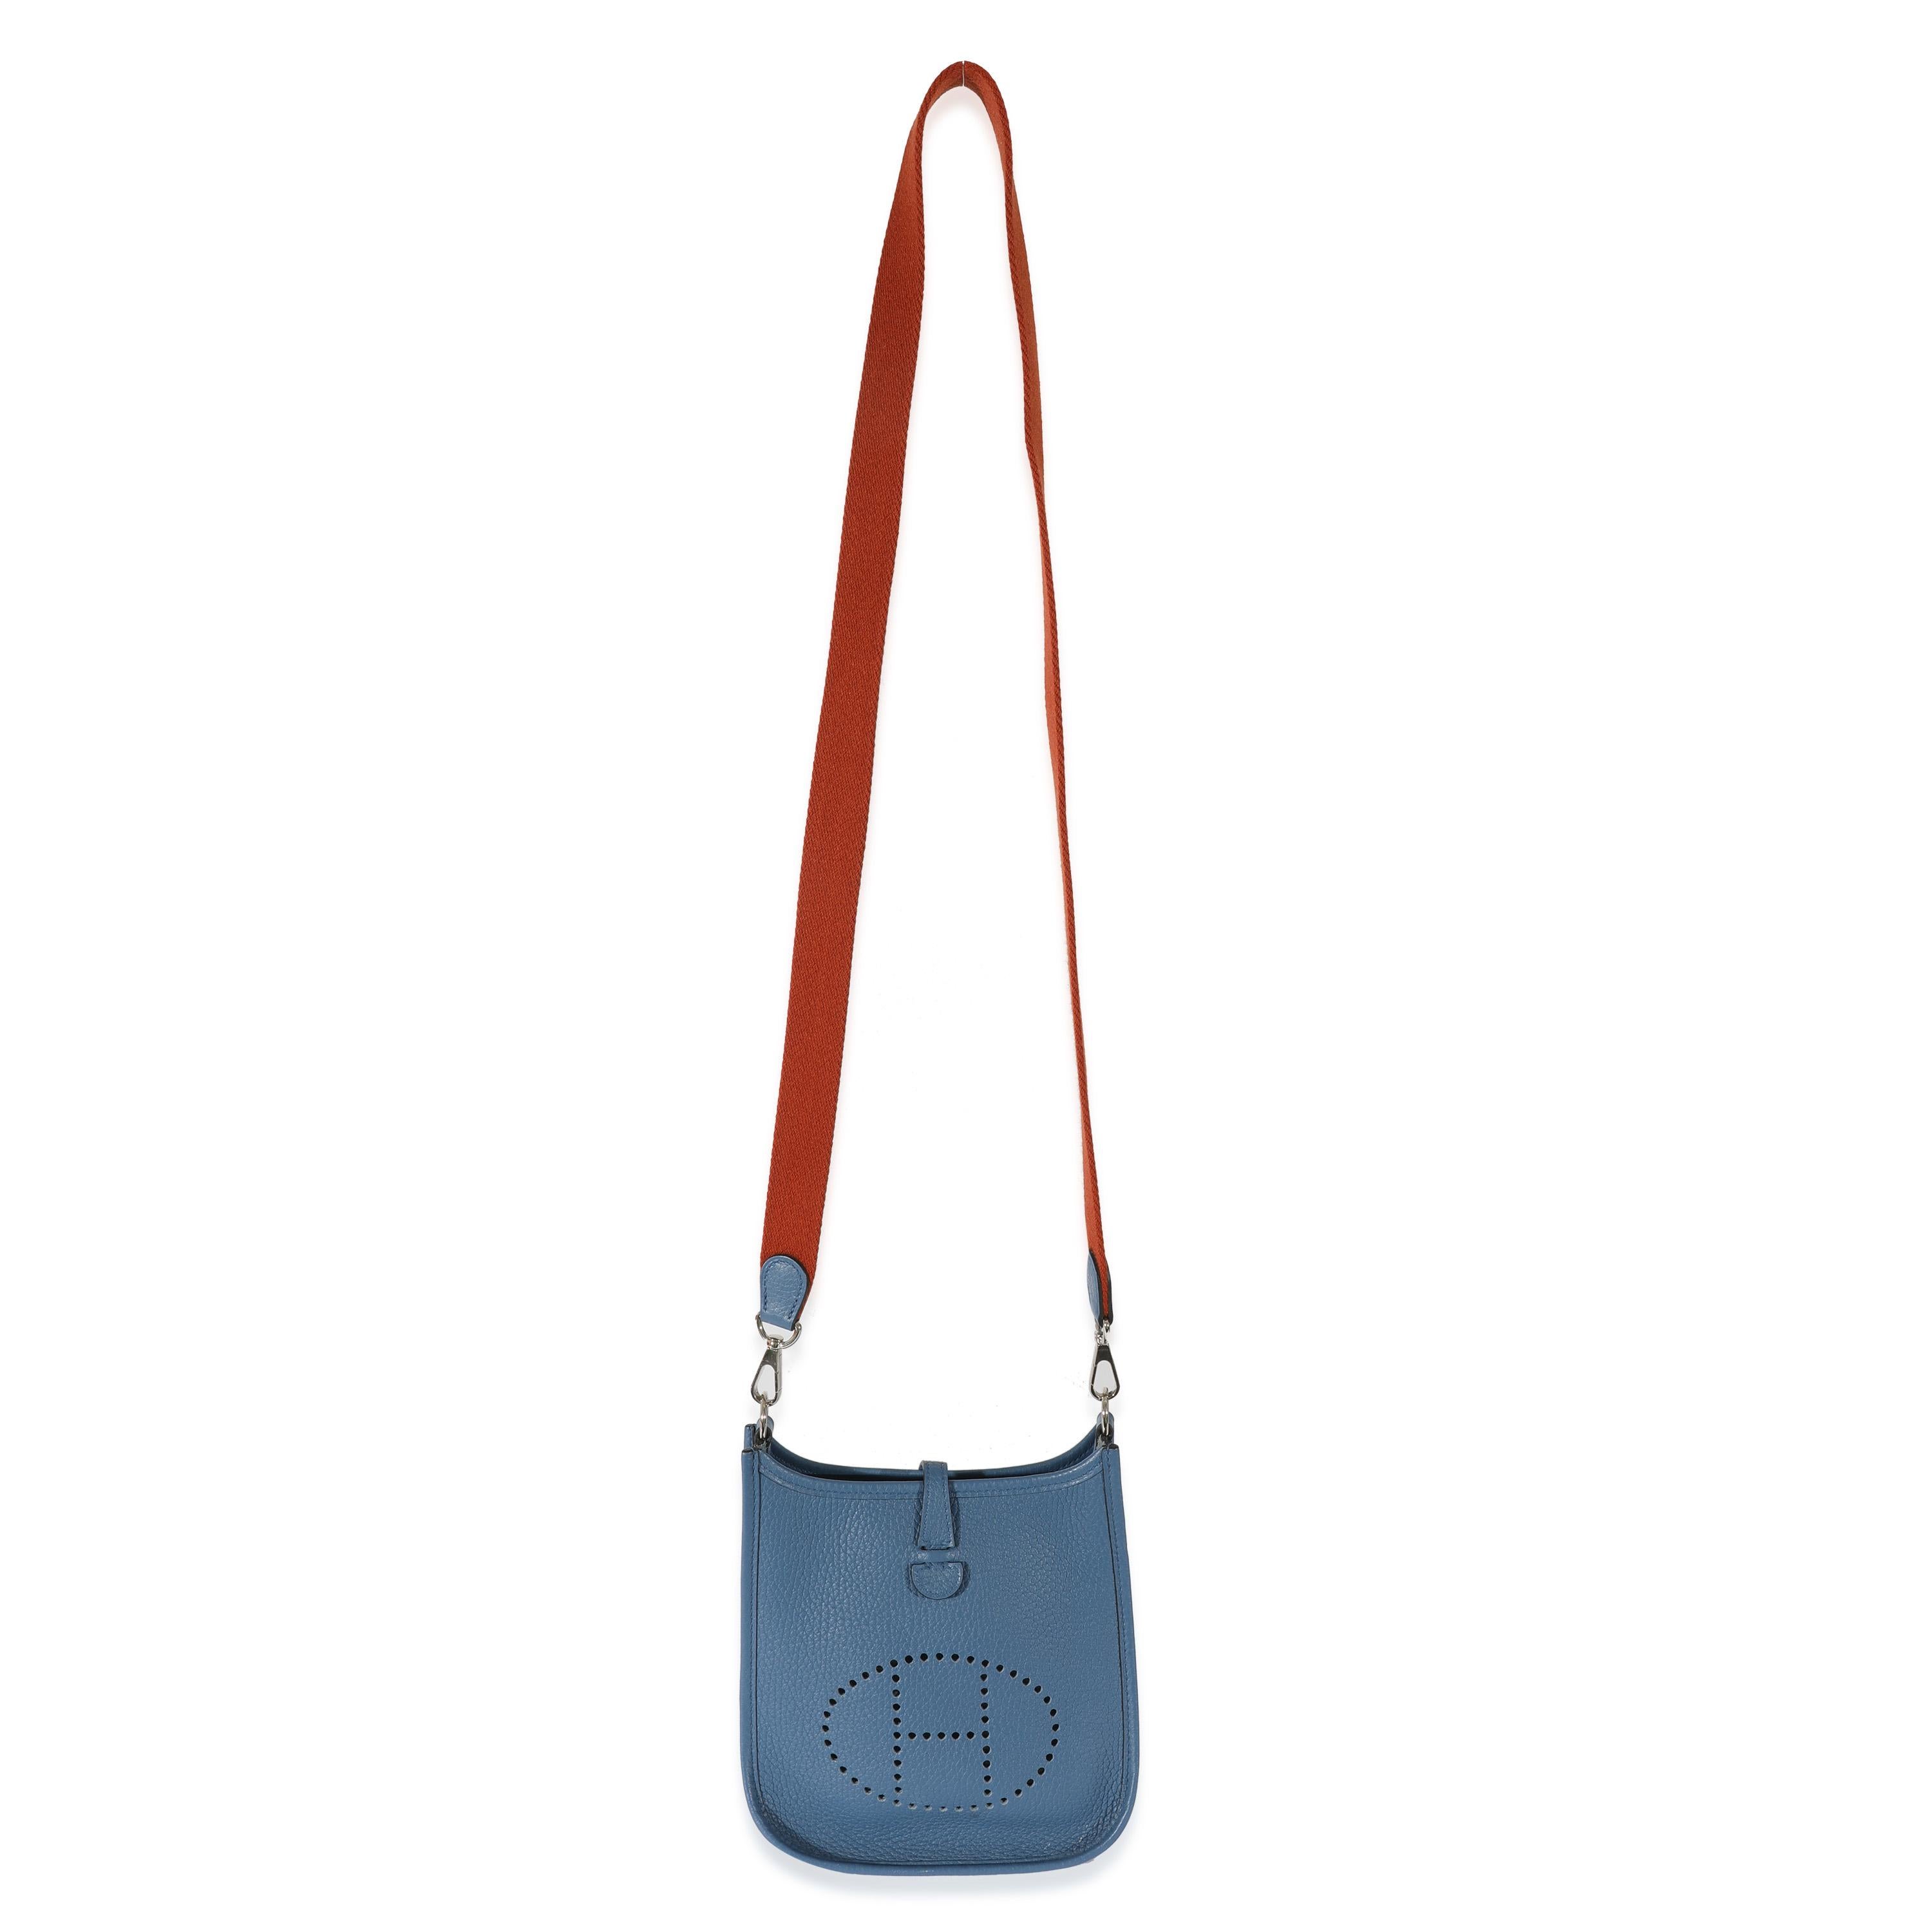 Listing Title: Herme Bleu Agate Cuivre Clemence Amazone Evelyne TPM
 SKU: 128637
 Condition: Pre-owned 
 Condition Description: Designed in 1978 by Evelyne Bertrand, the Evelyne shoulder bag from Hermès has a distinctive aesthetic thanks to a